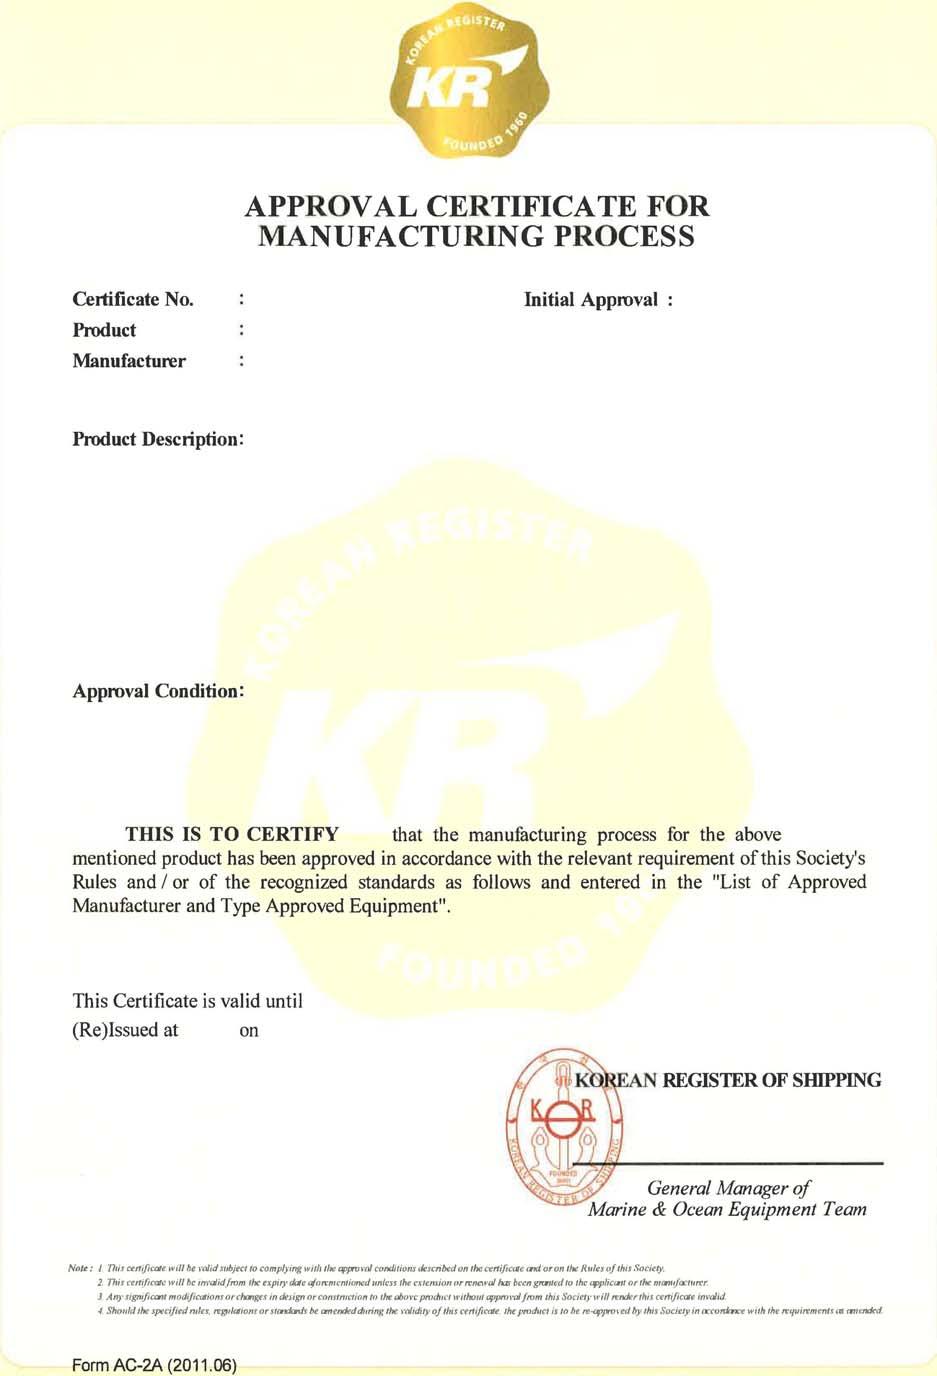 Annex 1 Approval Certificate for Manufacturing Process Annex 1 <1.